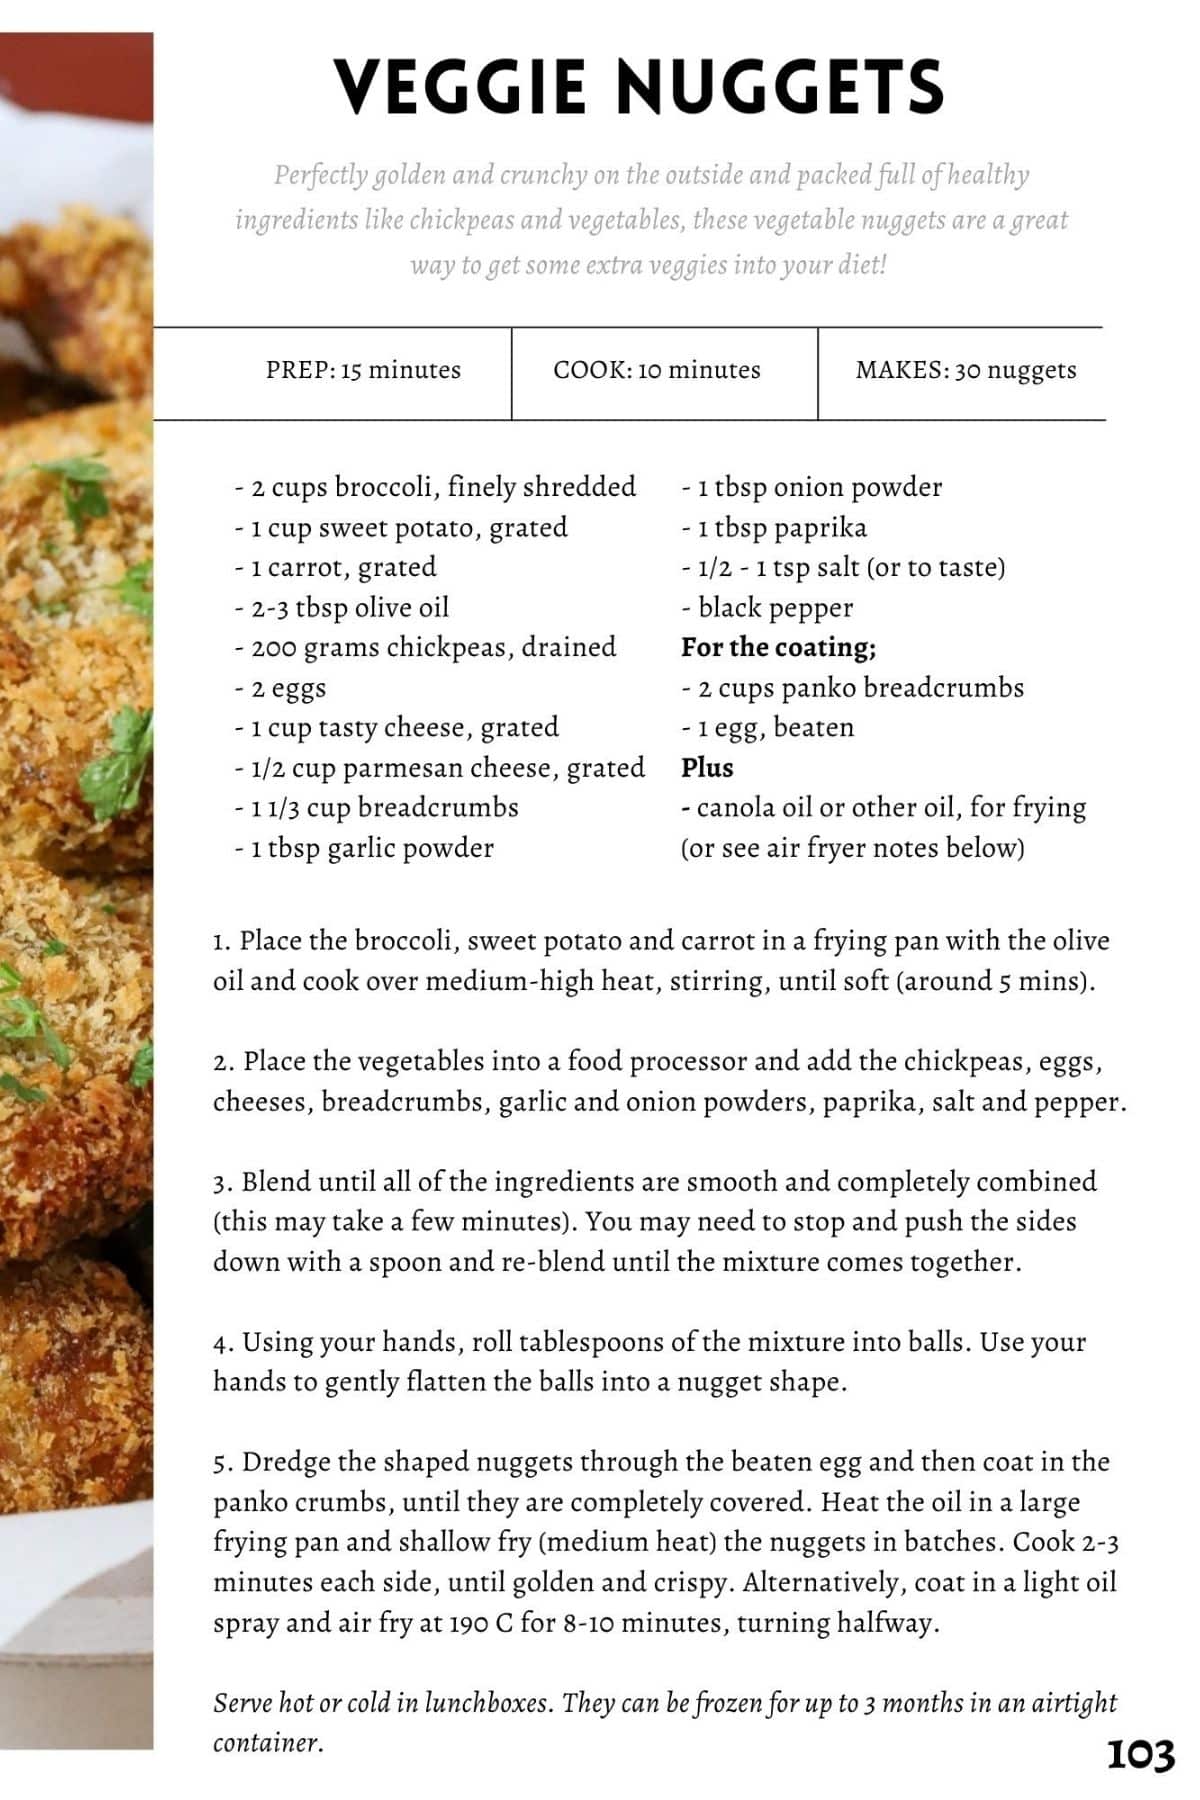 a page from an ebook showing a recipe for vegetable nuggets